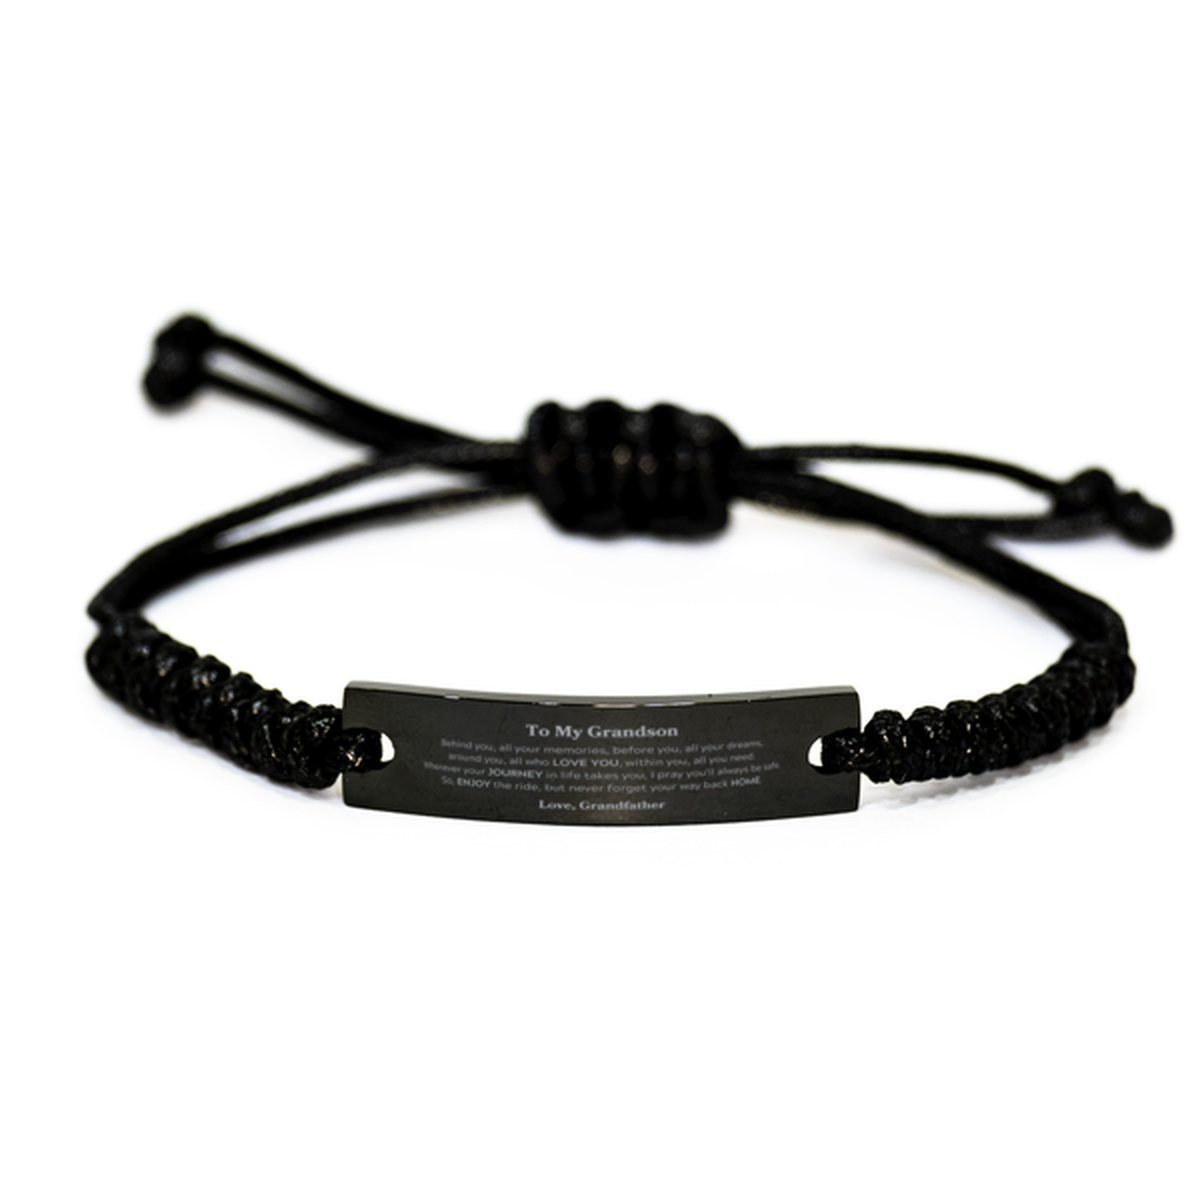 To My Grandson Graduation Gifts from Grandfather, Grandson Black Rope Bracelet Christmas Birthday Gifts for Grandson Behind you, all your memories, before you, all your dreams. Love, Grandfather